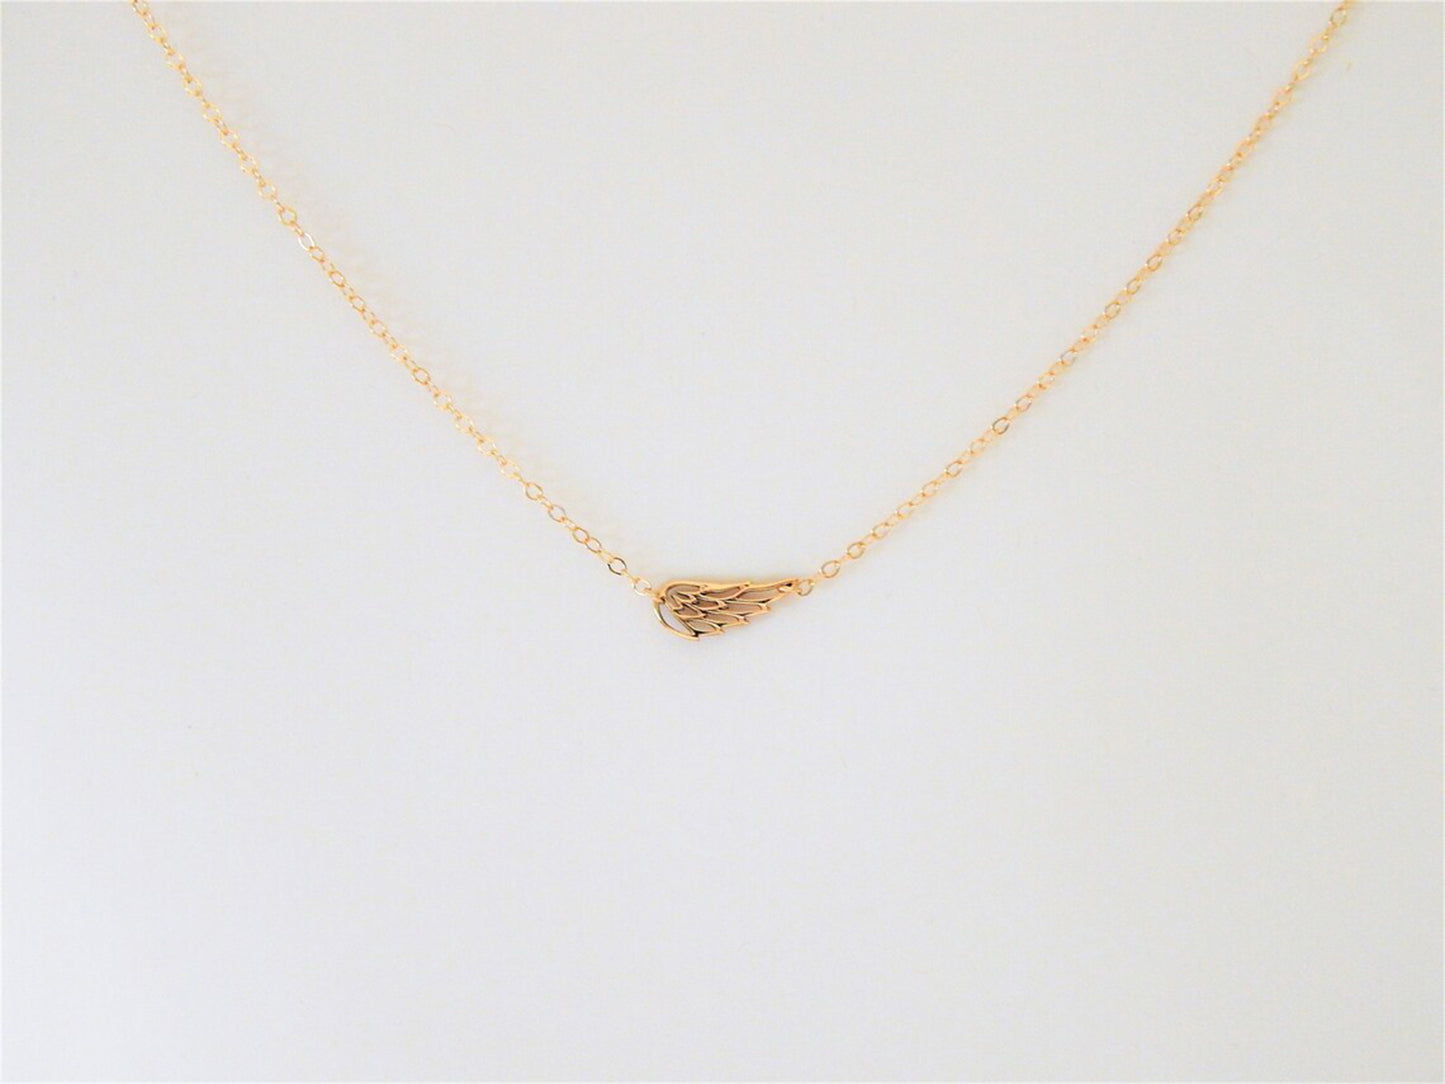 Wing charm on a simple dainty gold filled necklace chain is displayed against a plain white background to showcase the qualities of this sentimental or religious jewelry gift.